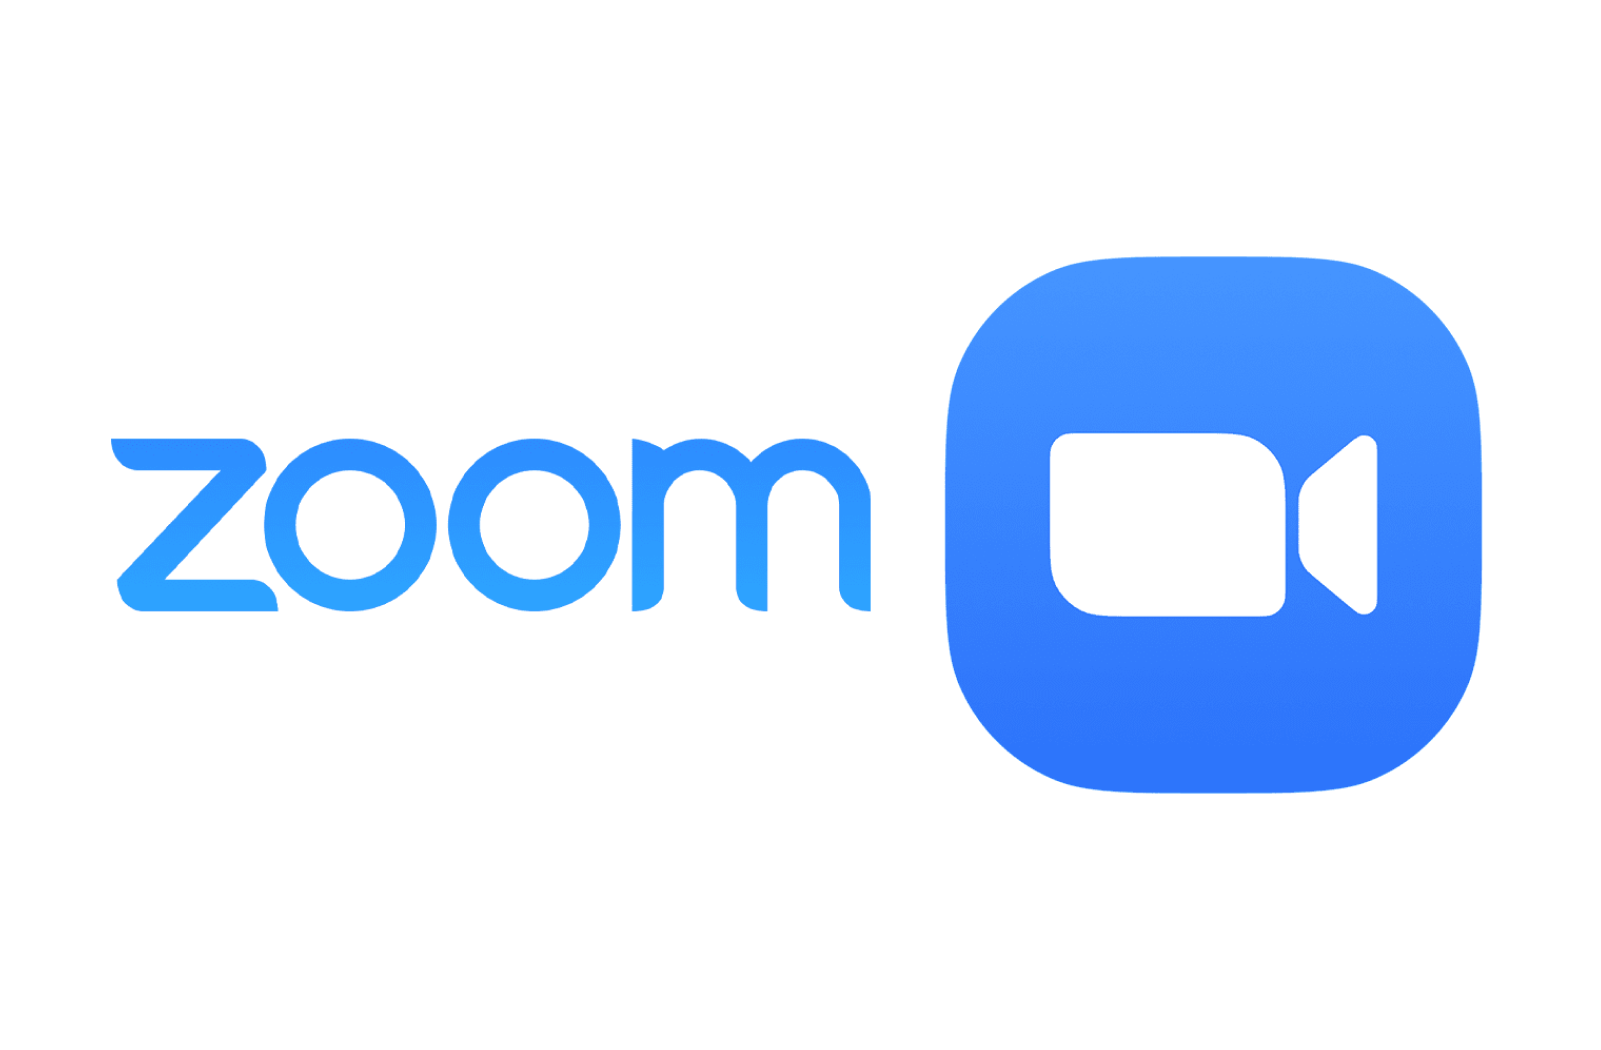 Zoom is an exemplary and immensely successful SaaS product that has revolutionized the way we connect and communicate.